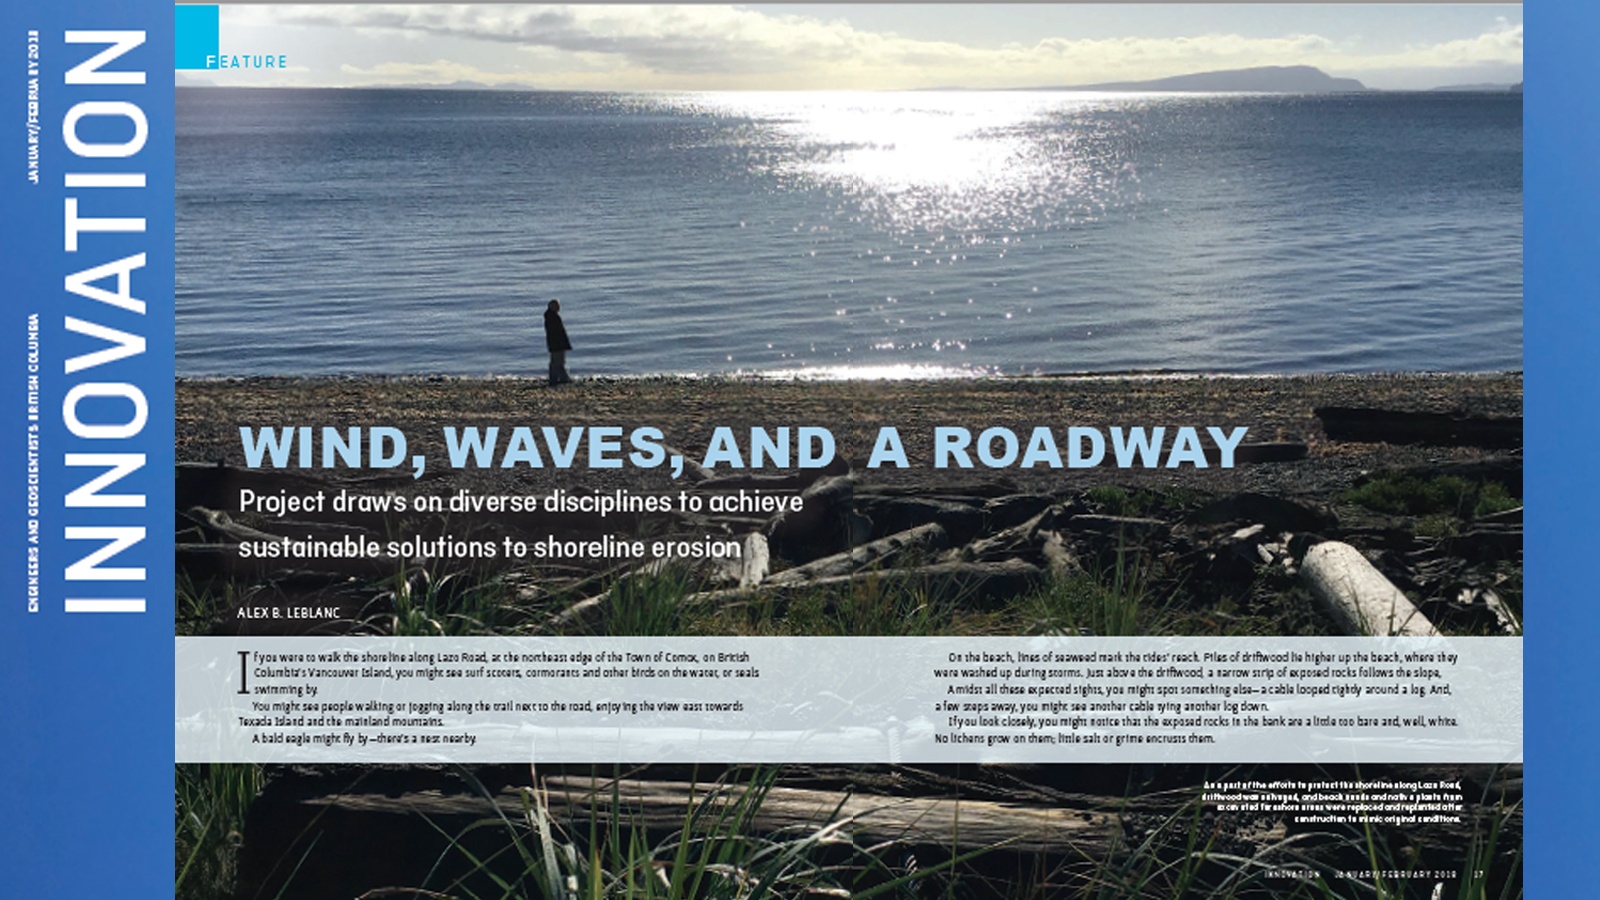 Wind, Waves, and a Roadway